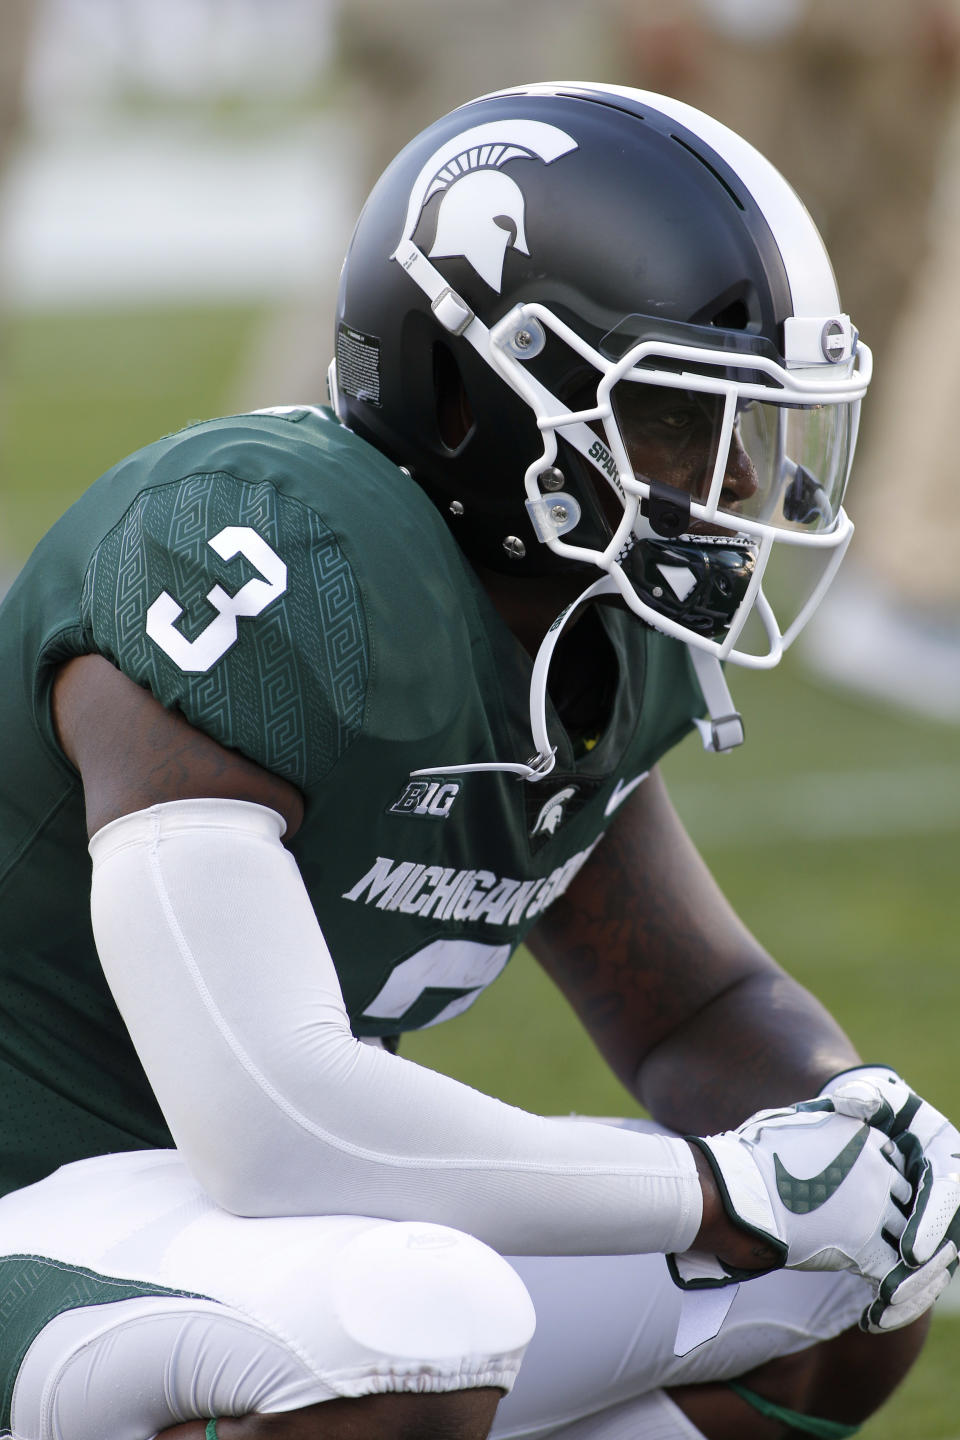 Michigan State running back LJ Scott pauses before an NCAA college football game against Utah State, Friday, Aug. 31, 2018, in East Lansing, Mich. (AP Photo/Al Goldis)